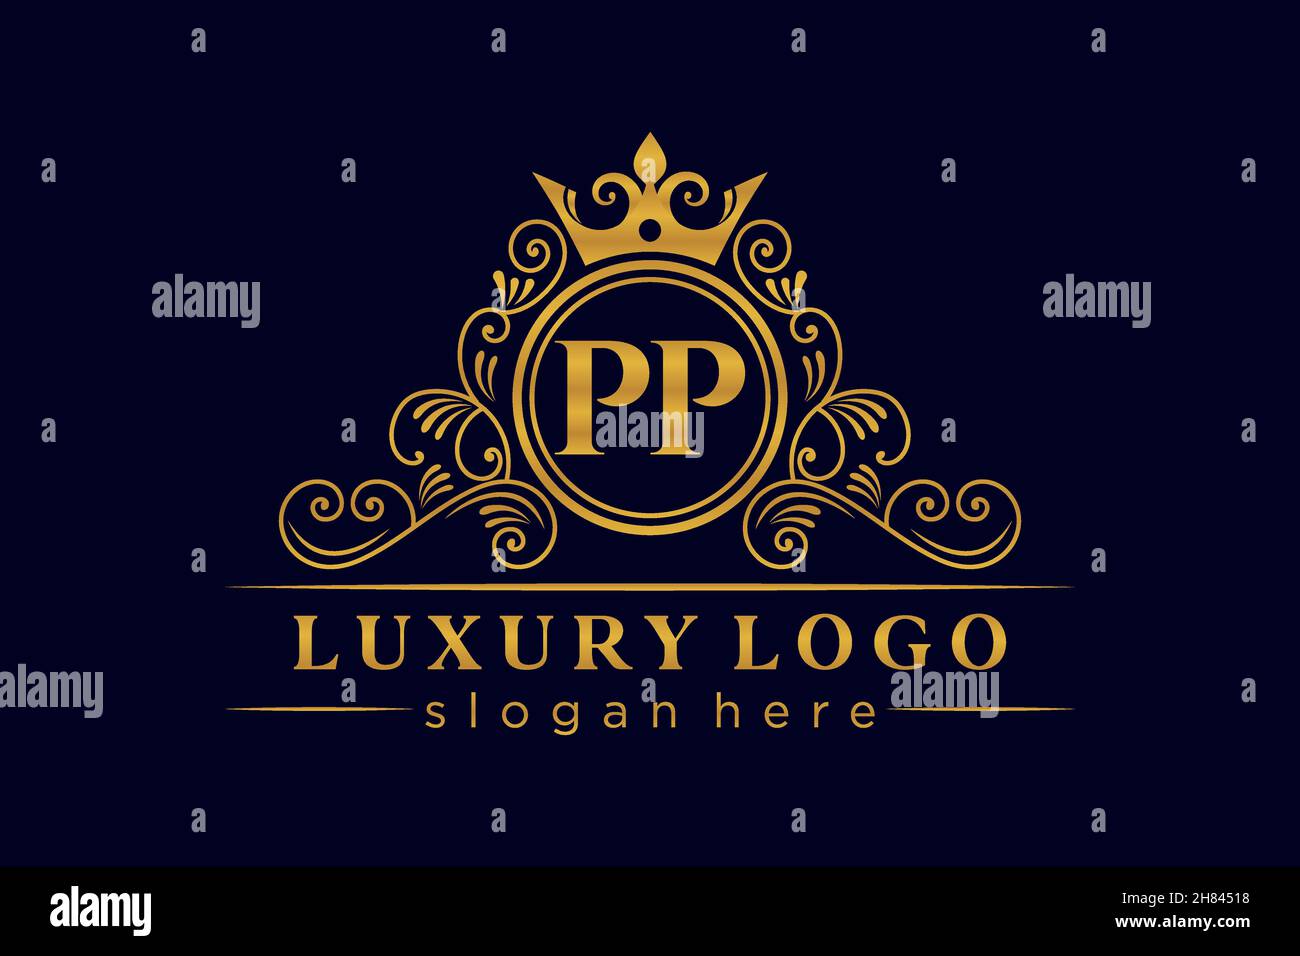 Pm Initial Monogram Logo Square Style Stock Vector (Royalty Free)  2161460651